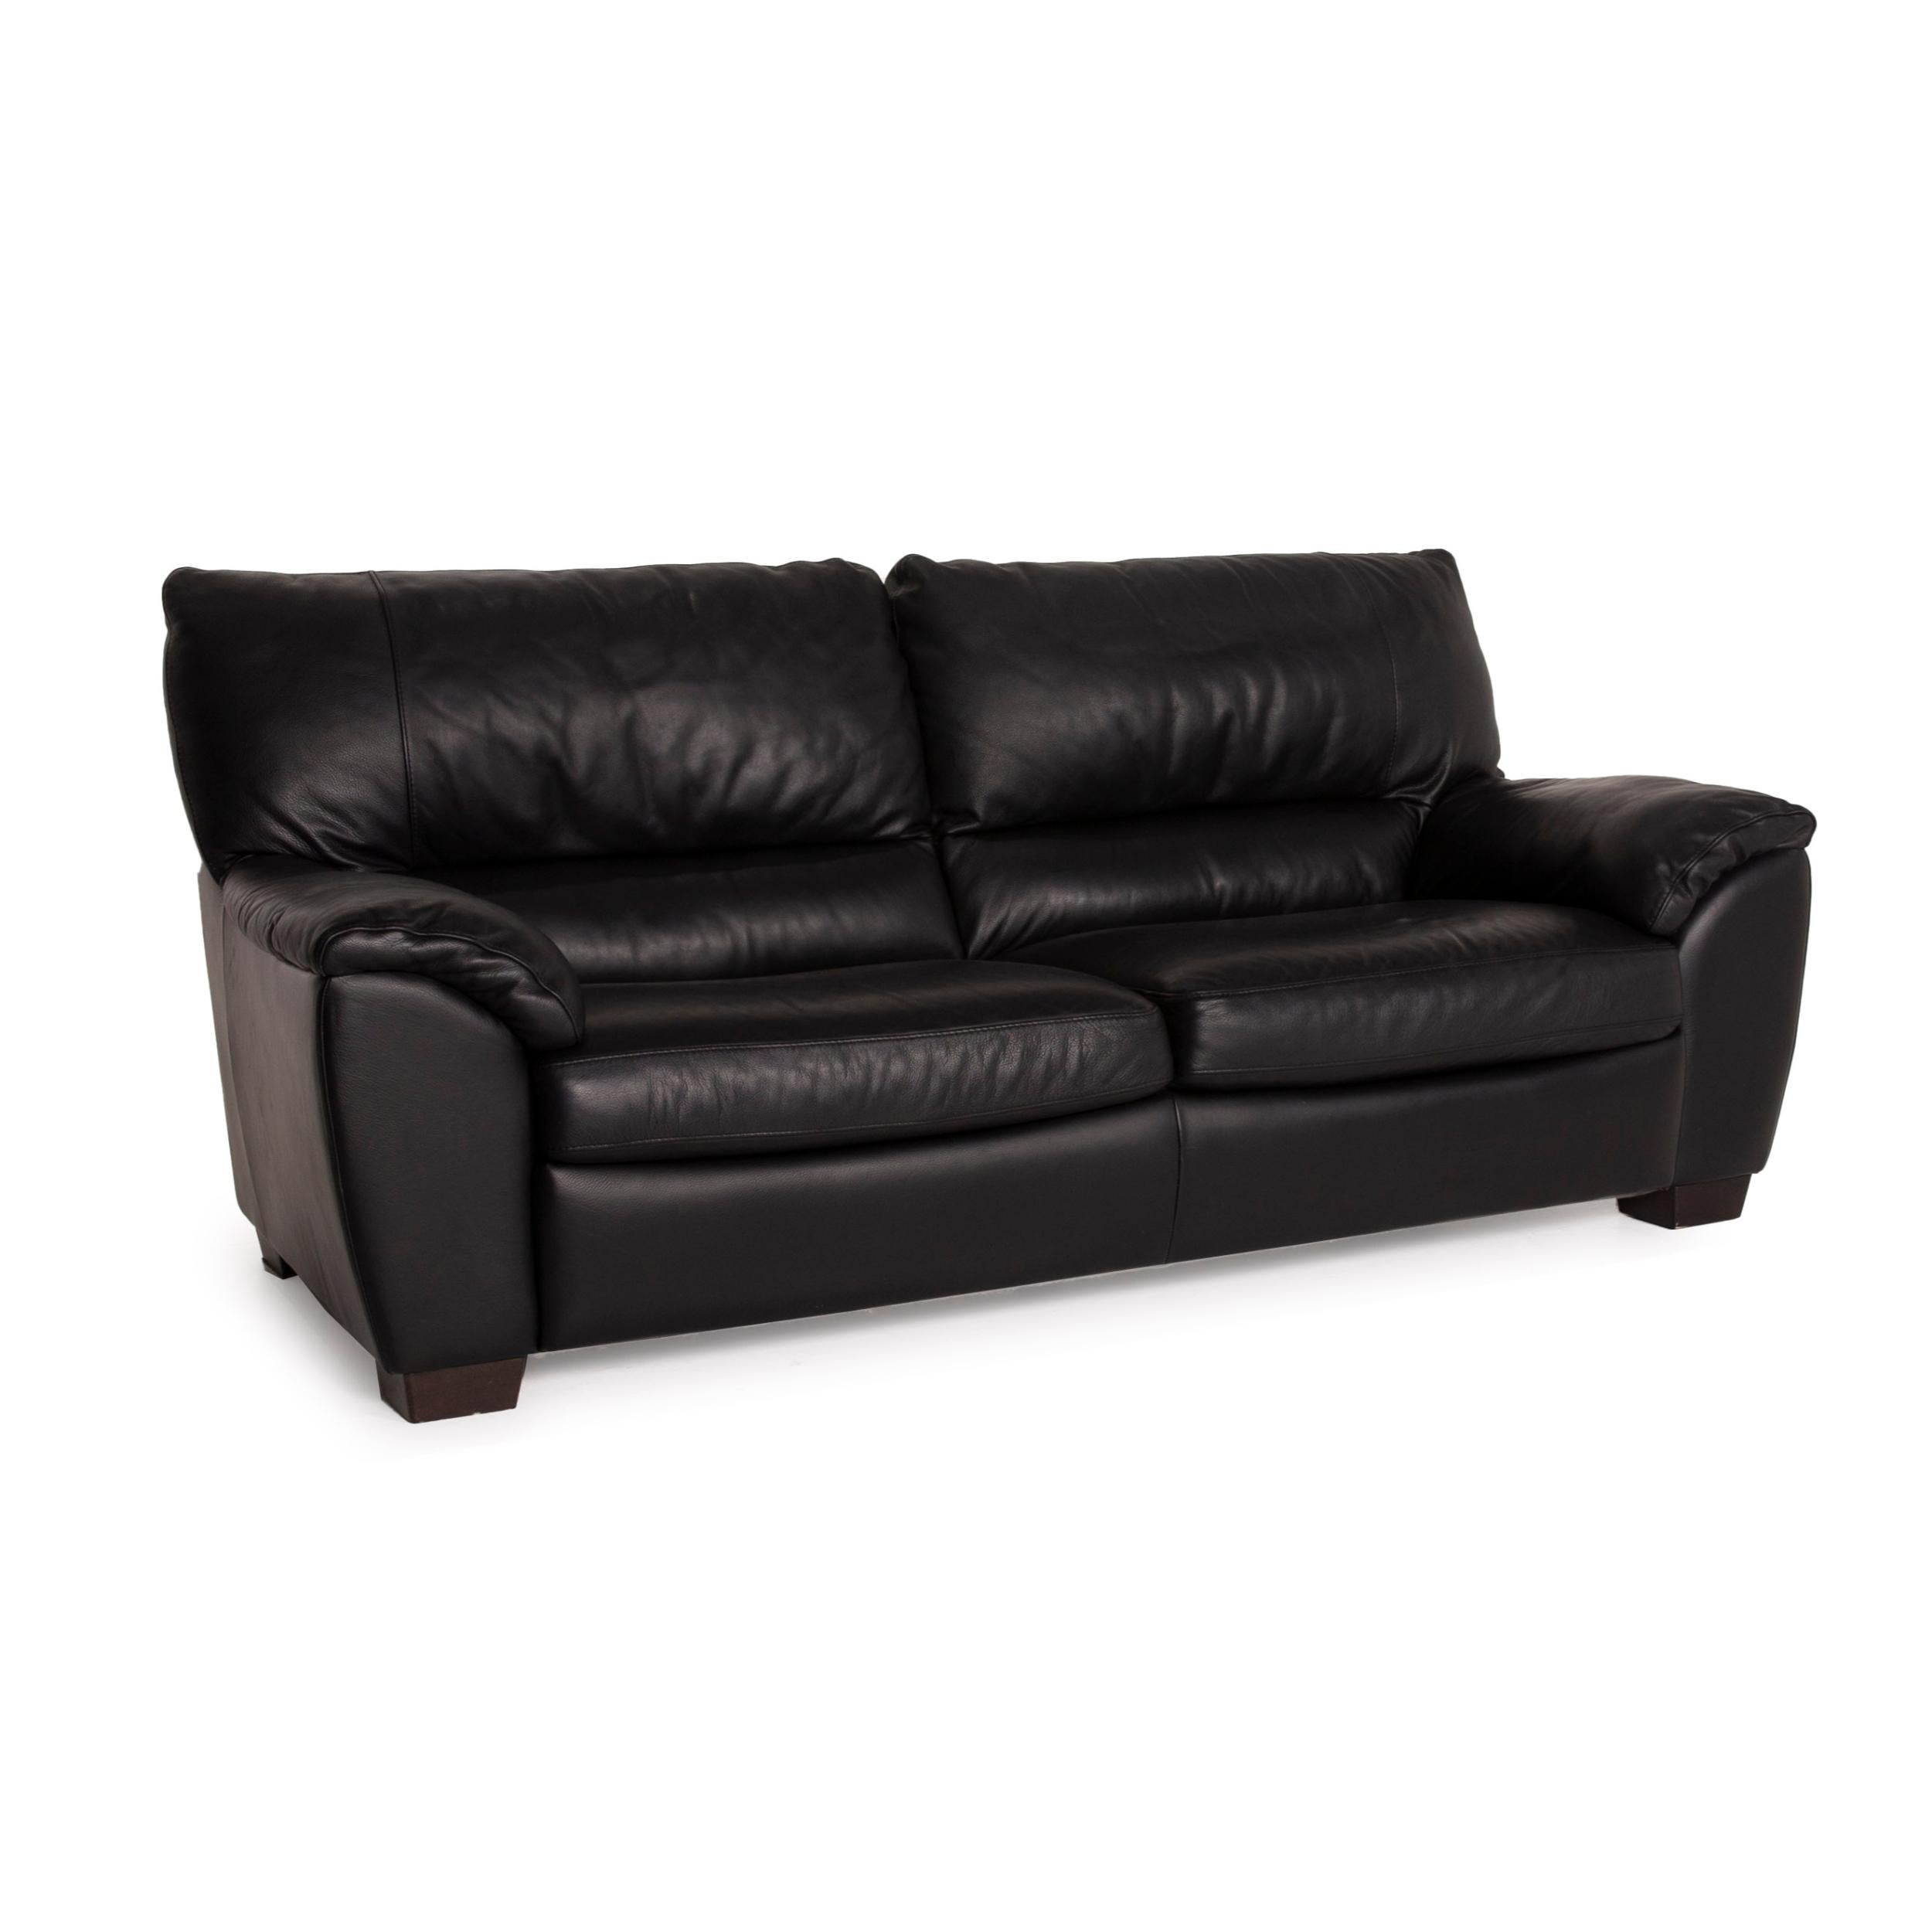 Contemporary Natuzzi Two-Seater Leather Sofa Set Black 2x Two-Seater